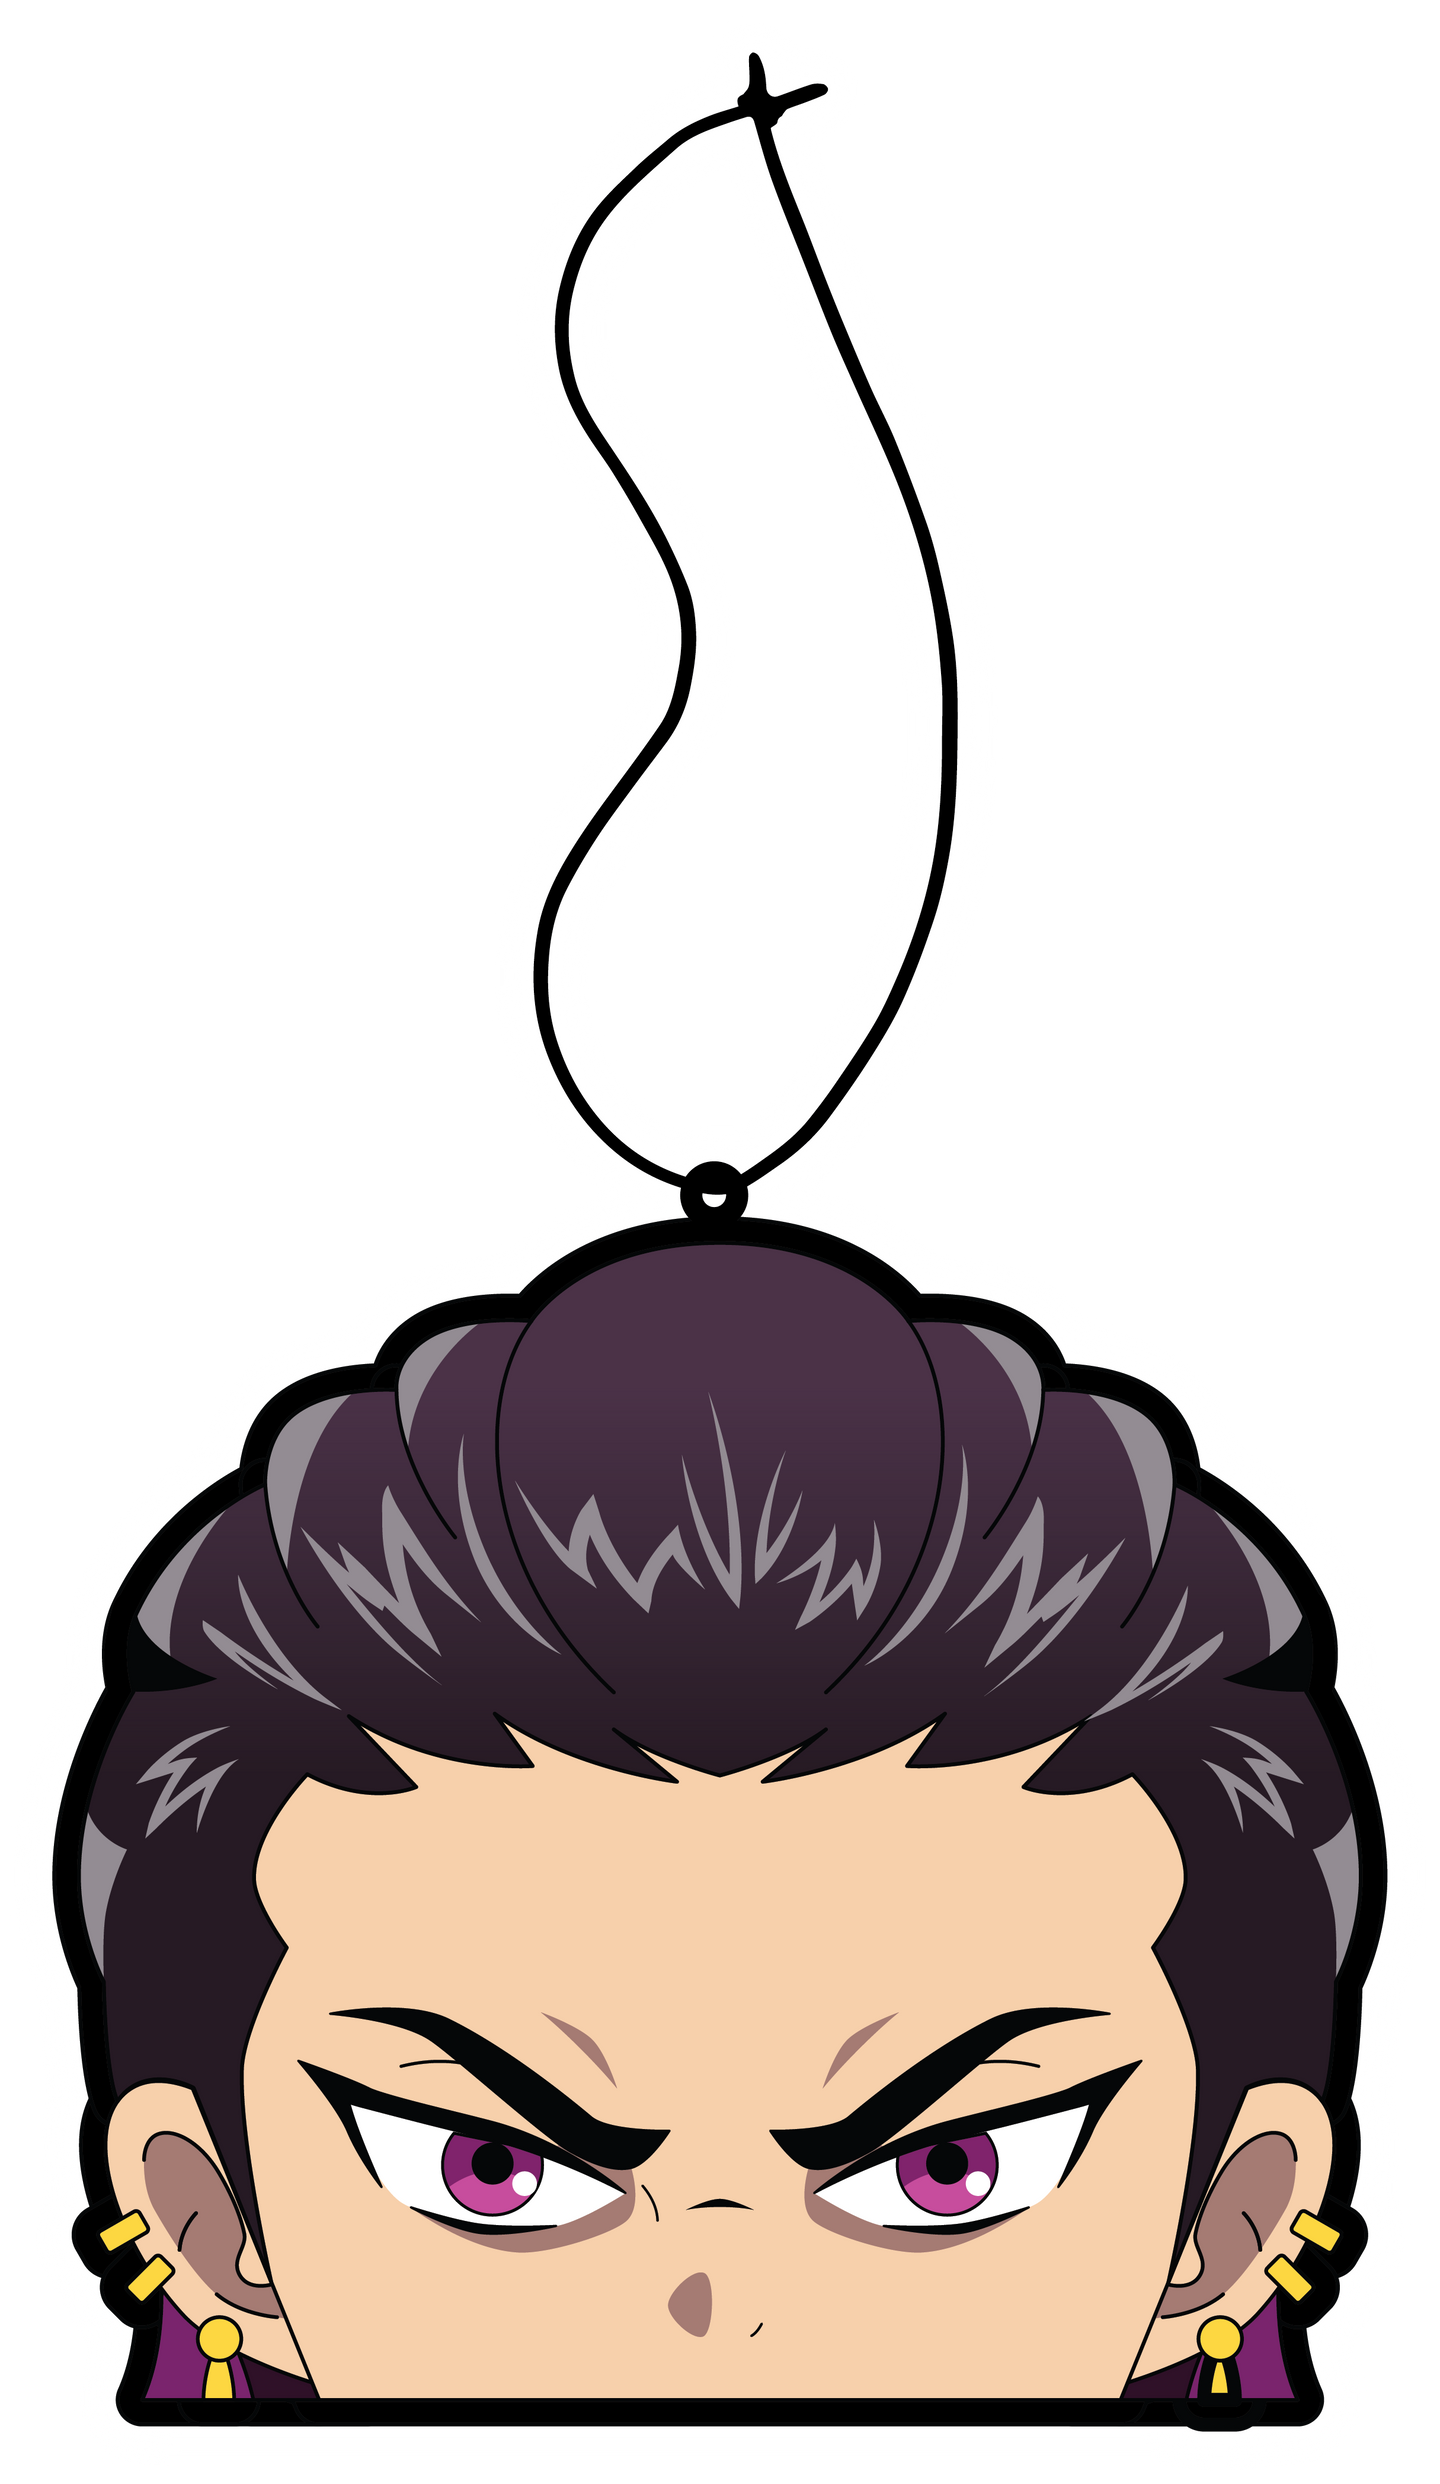 Anime Reyna Anime Character Air Freshener. Purple slick back hair with purple eyes and gold cuff earrings. Angry japanese air freshener hanging from black string.